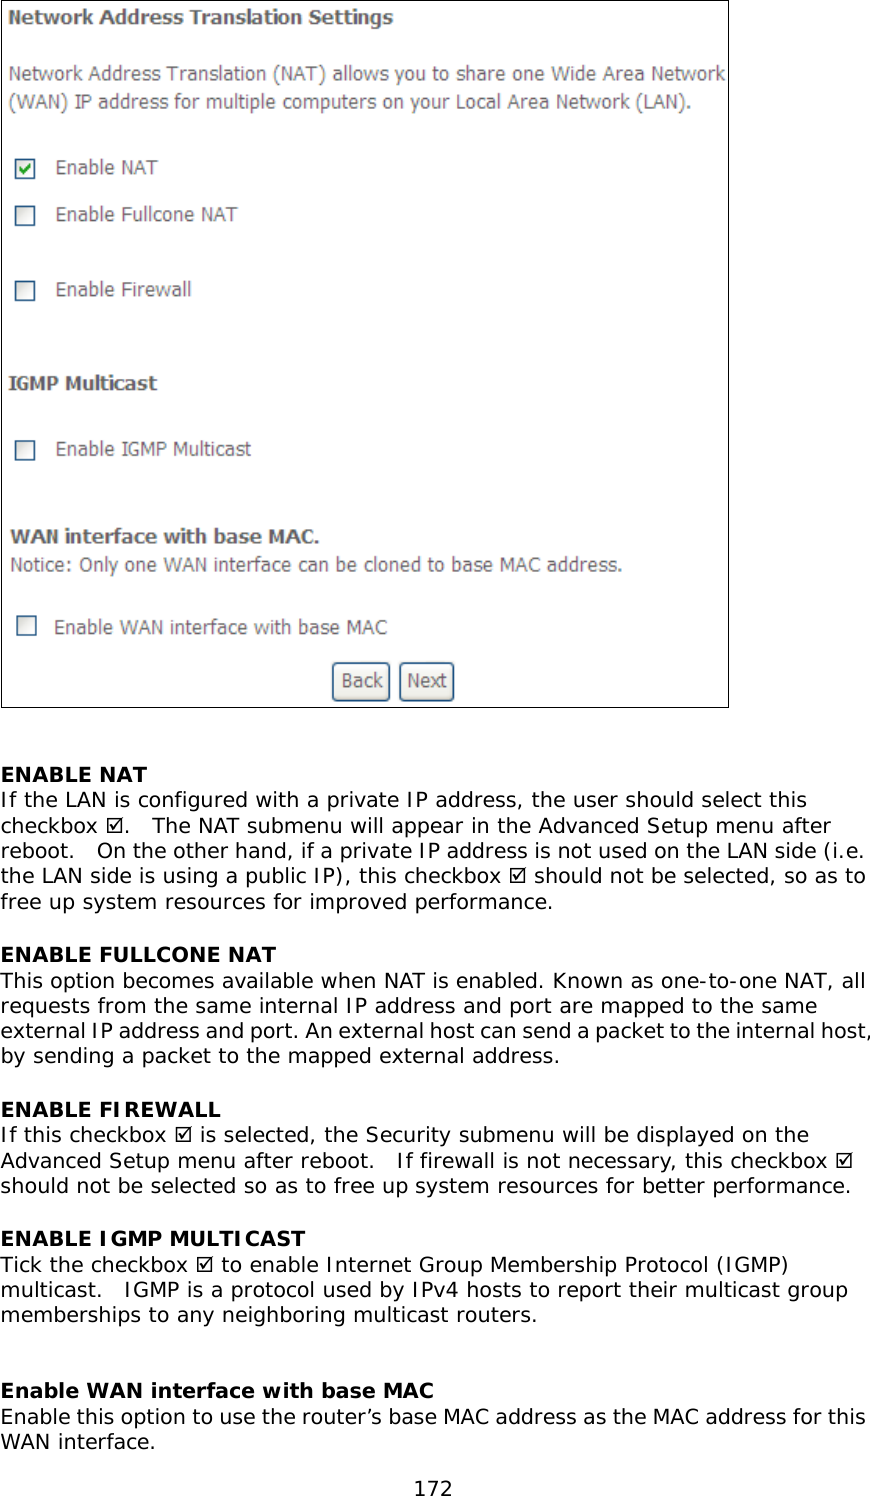  172   ENABLE NAT If the LAN is configured with a private IP address, the user should select this checkbox .  The NAT submenu will appear in the Advanced Setup menu after reboot.  On the other hand, if a private IP address is not used on the LAN side (i.e. the LAN side is using a public IP), this checkbox  should not be selected, so as to free up system resources for improved performance. ENABLE FULLCONE NAT   This option becomes available when NAT is enabled. Known as one-to-one NAT, all requests from the same internal IP address and port are mapped to the same external IP address and port. An external host can send a packet to the internal host, by sending a packet to the mapped external address. ENABLE FIREWALL If this checkbox  is selected, the Security submenu will be displayed on the Advanced Setup menu after reboot.  If firewall is not necessary, this checkbox  should not be selected so as to free up system resources for better performance.   ENABLE IGMP MULTICAST Tick the checkbox  to enable Internet Group Membership Protocol (IGMP) multicast.  IGMP is a protocol used by IPv4 hosts to report their multicast group memberships to any neighboring multicast routers.    Enable WAN interface with base MAC  Enable this option to use the router’s base MAC address as the MAC address for this WAN interface. 